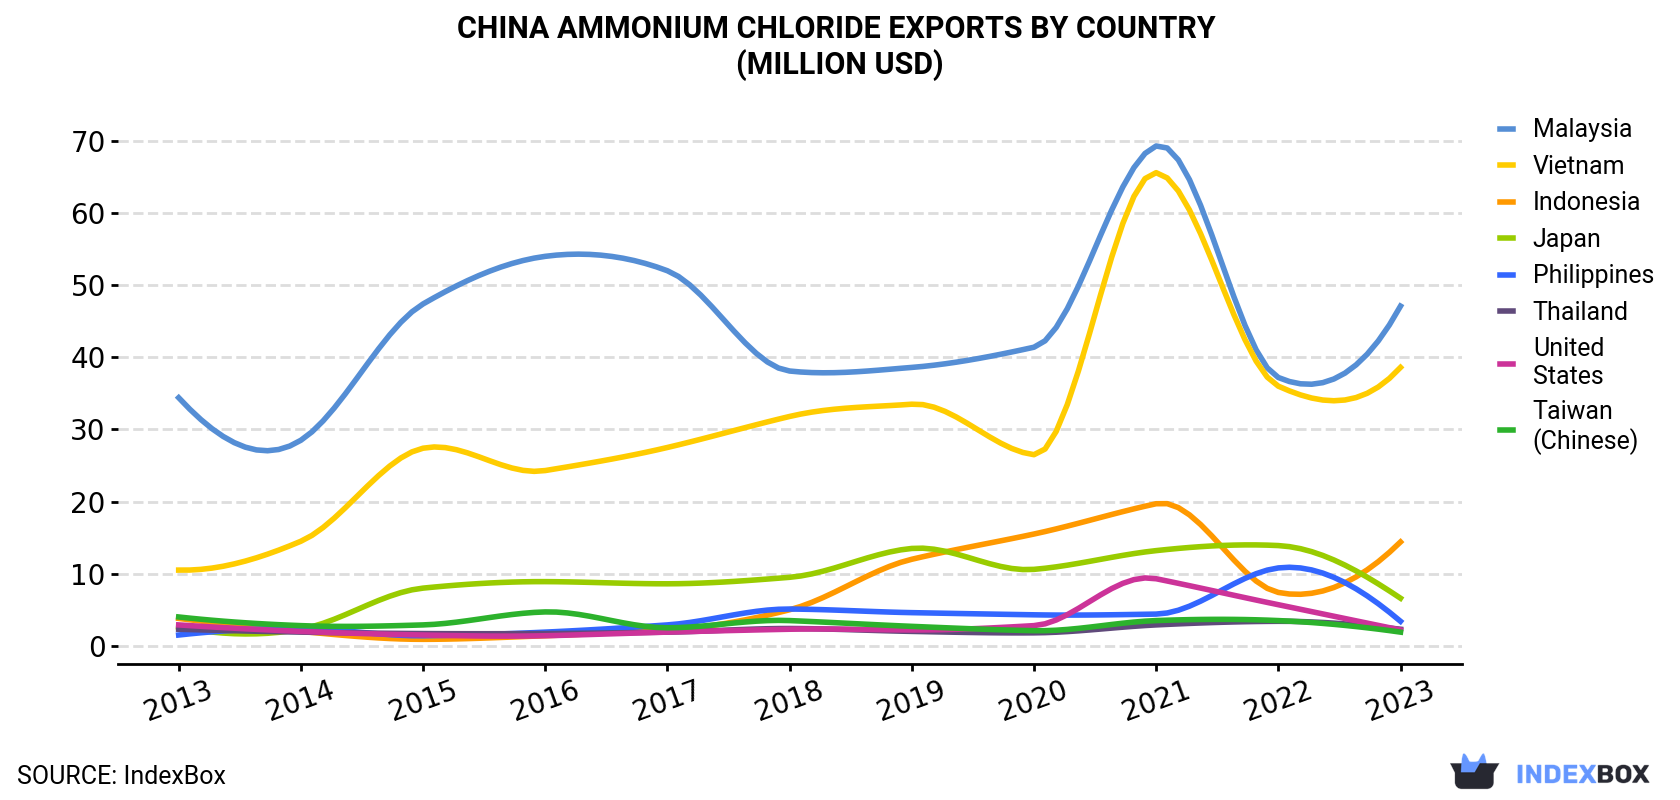 China Ammonium Chloride Exports By Country (Million USD)